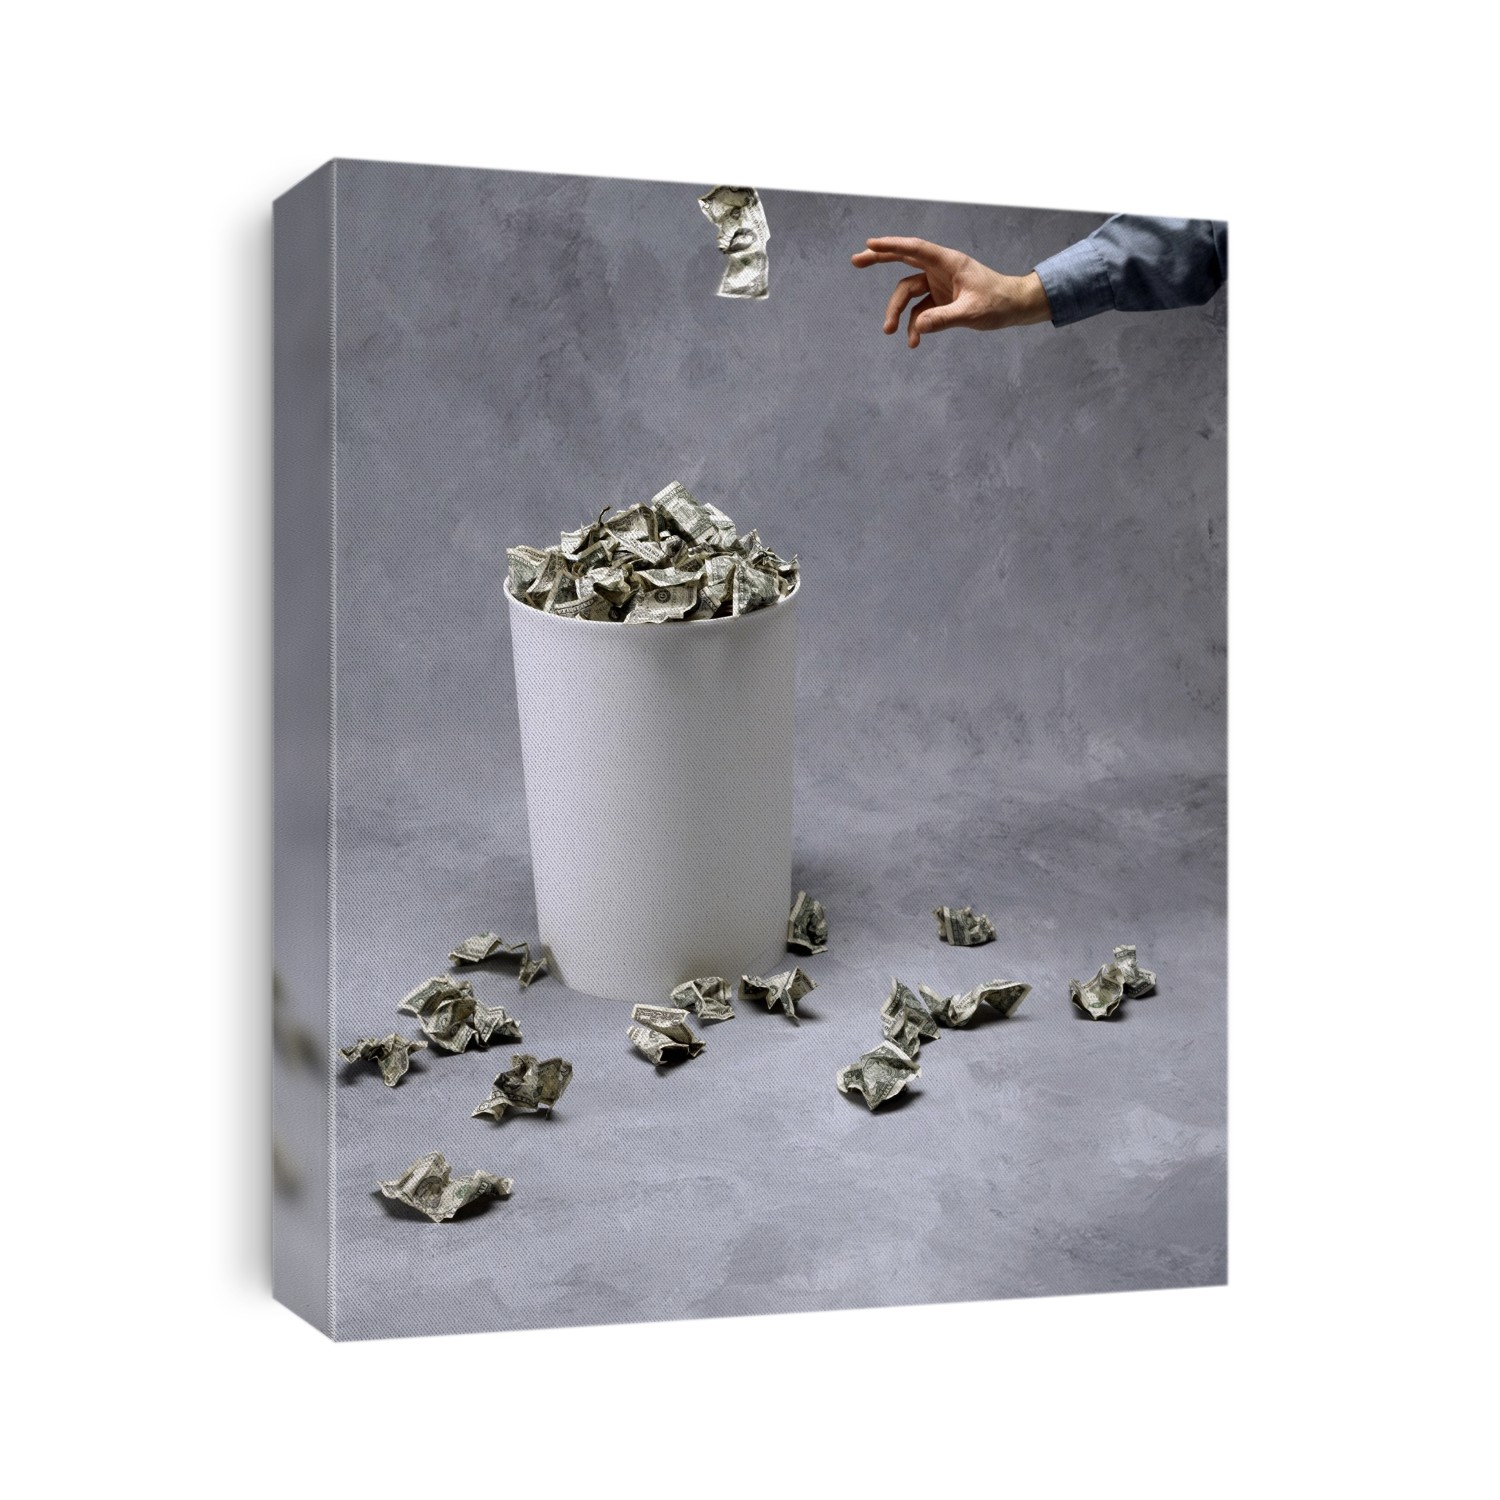 Throwing US currency into a bin. Conceptual image of US dollar bills (USD) being thrown away, representing concepts such as financial waste and missing economic targets.